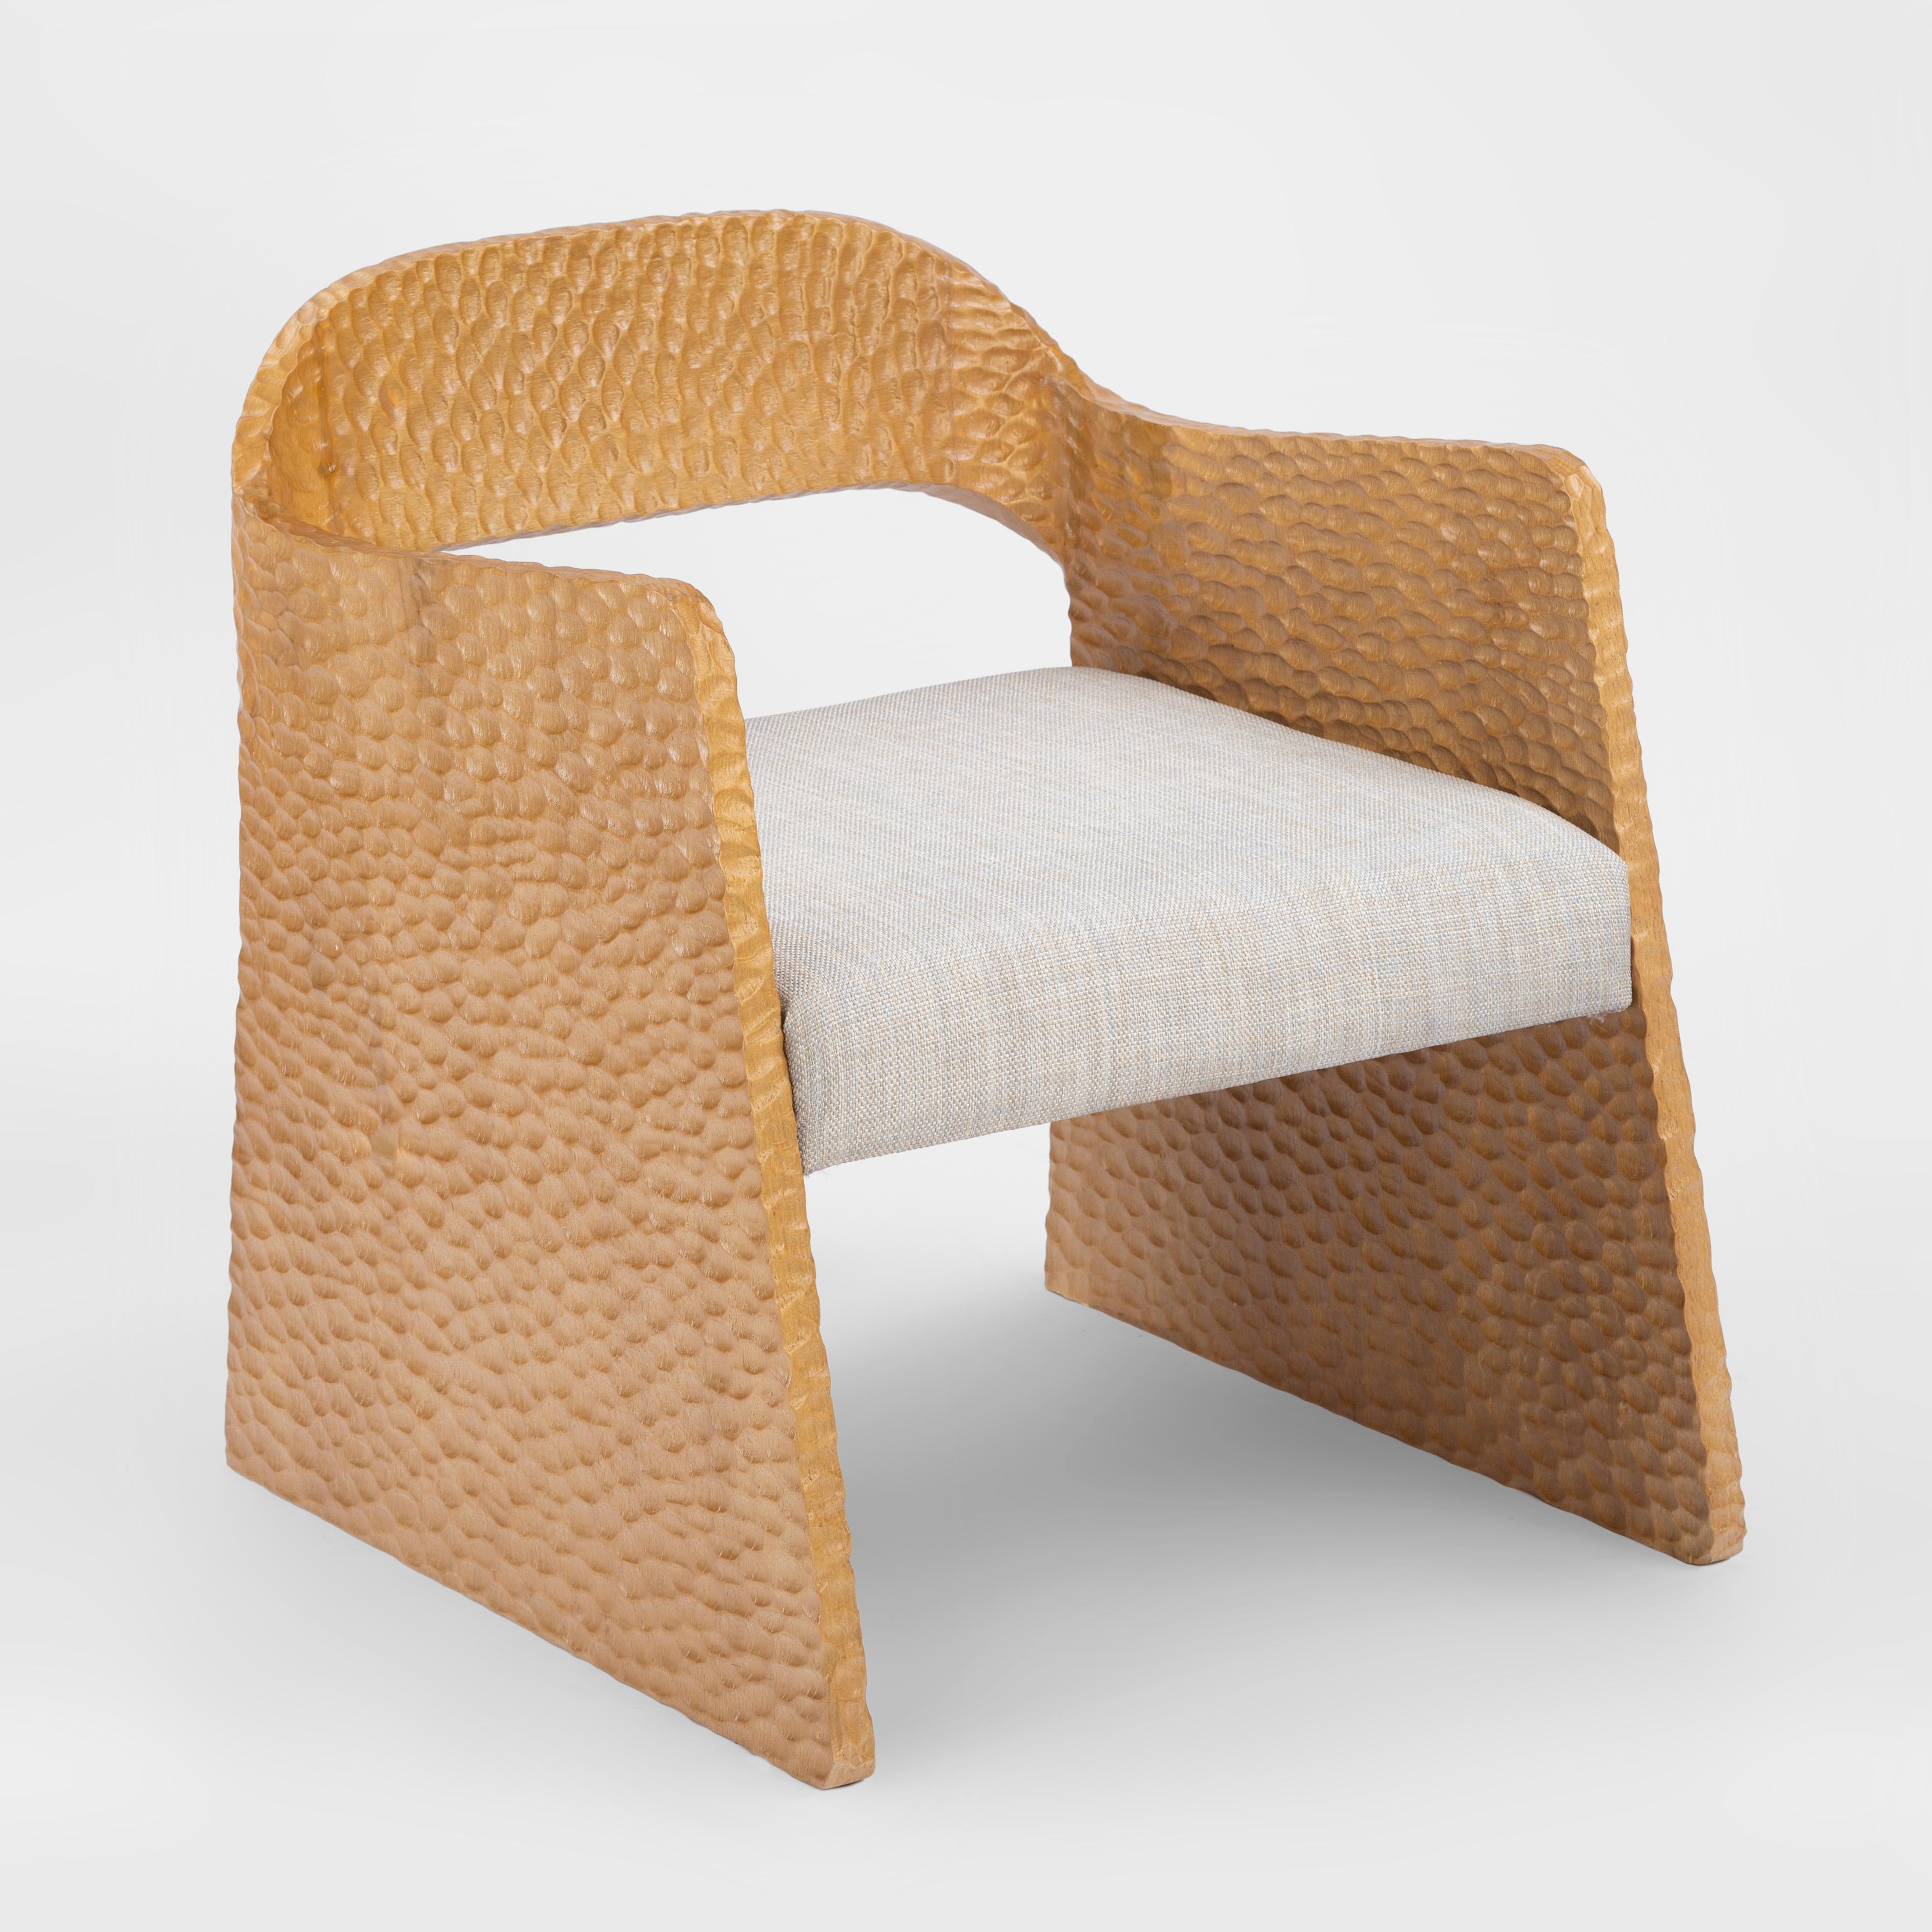 Hand-carve massive oak wood armchair inspired by Ancient Egyptian Temples.

The temple armchair is regarded as the spiritual Godfather of the Nubia Collection. This regal chair is hand carved from massive Oak, so each one is unique. The chair